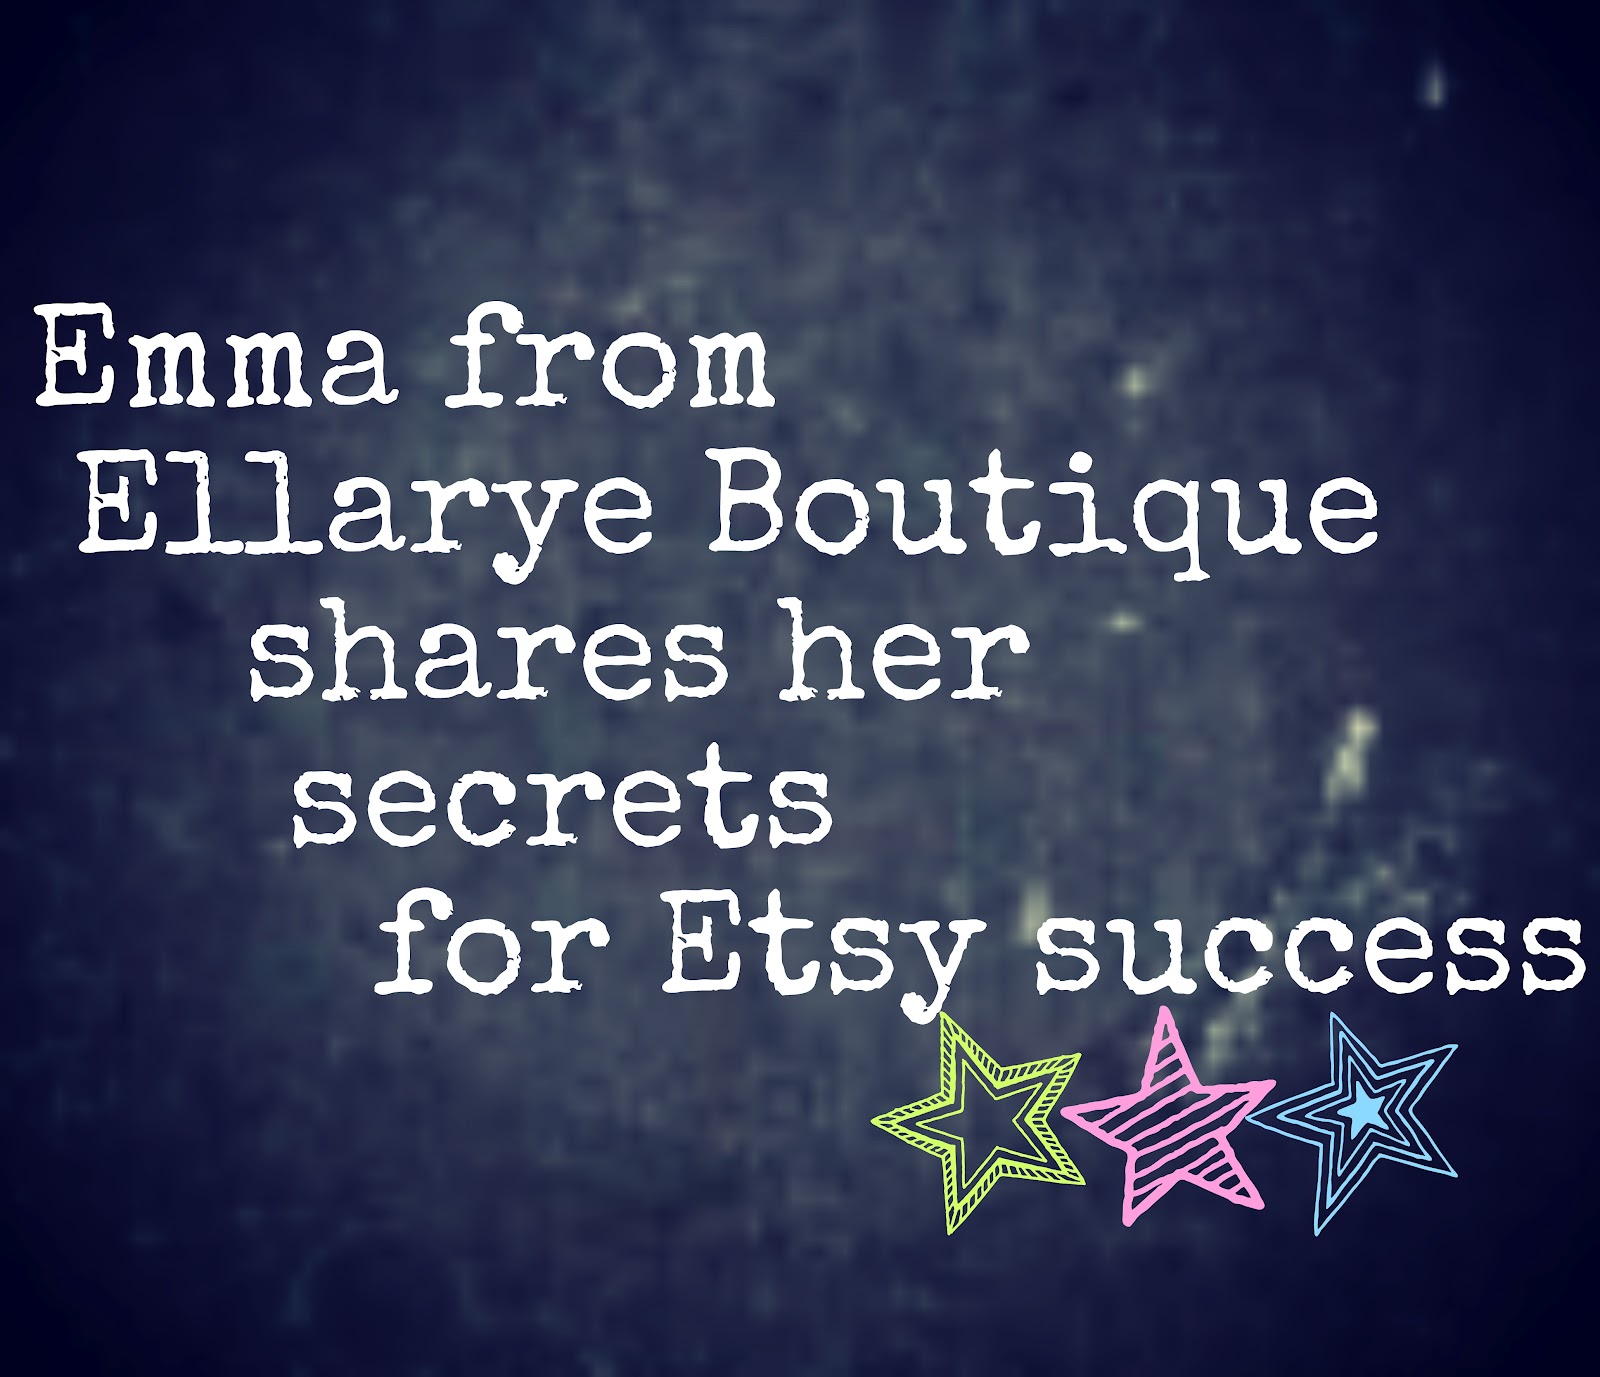 Ellarye Boutique Everything You Wanted To Know But Were Afraid To Ask